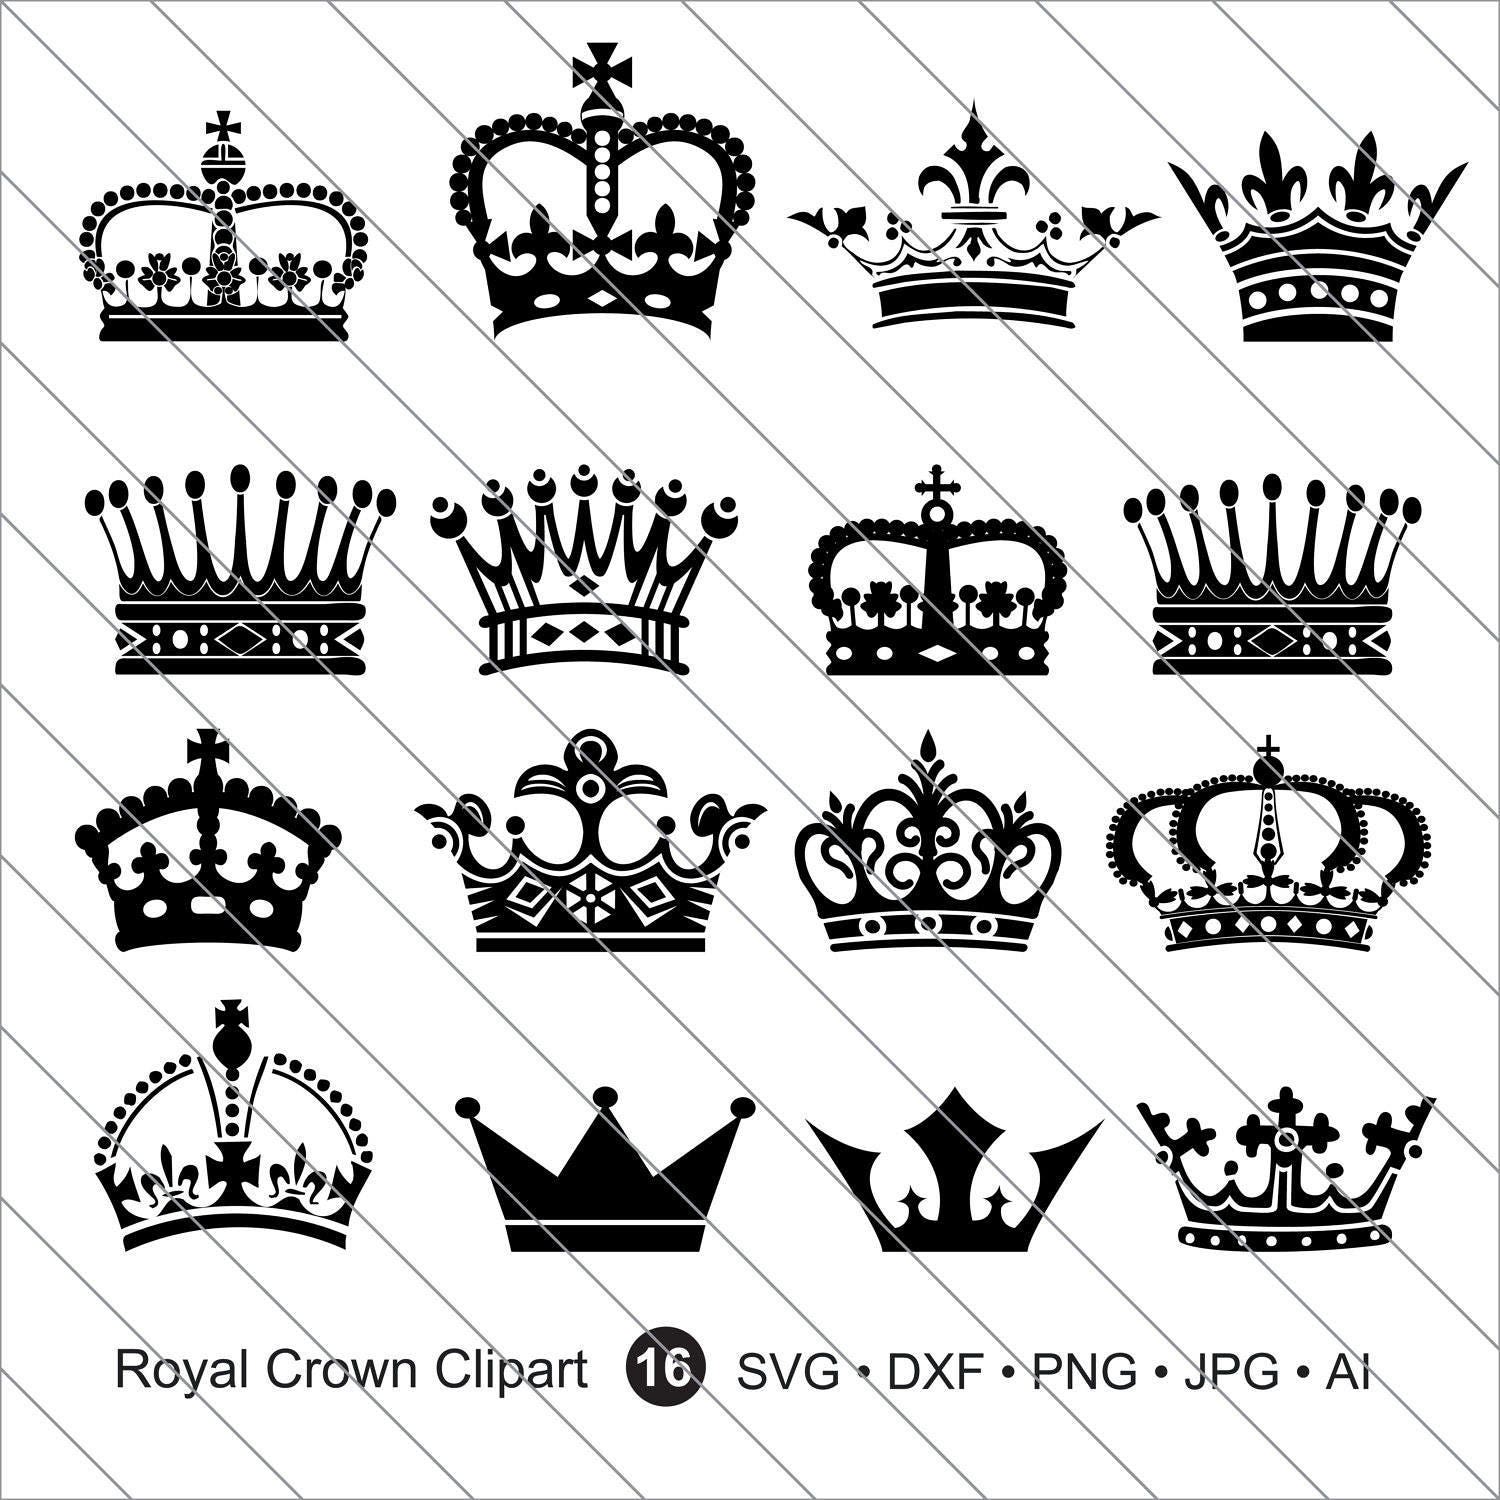 Download Royal Crown Silhouettes SVG crown silhouettes clipartRoyal